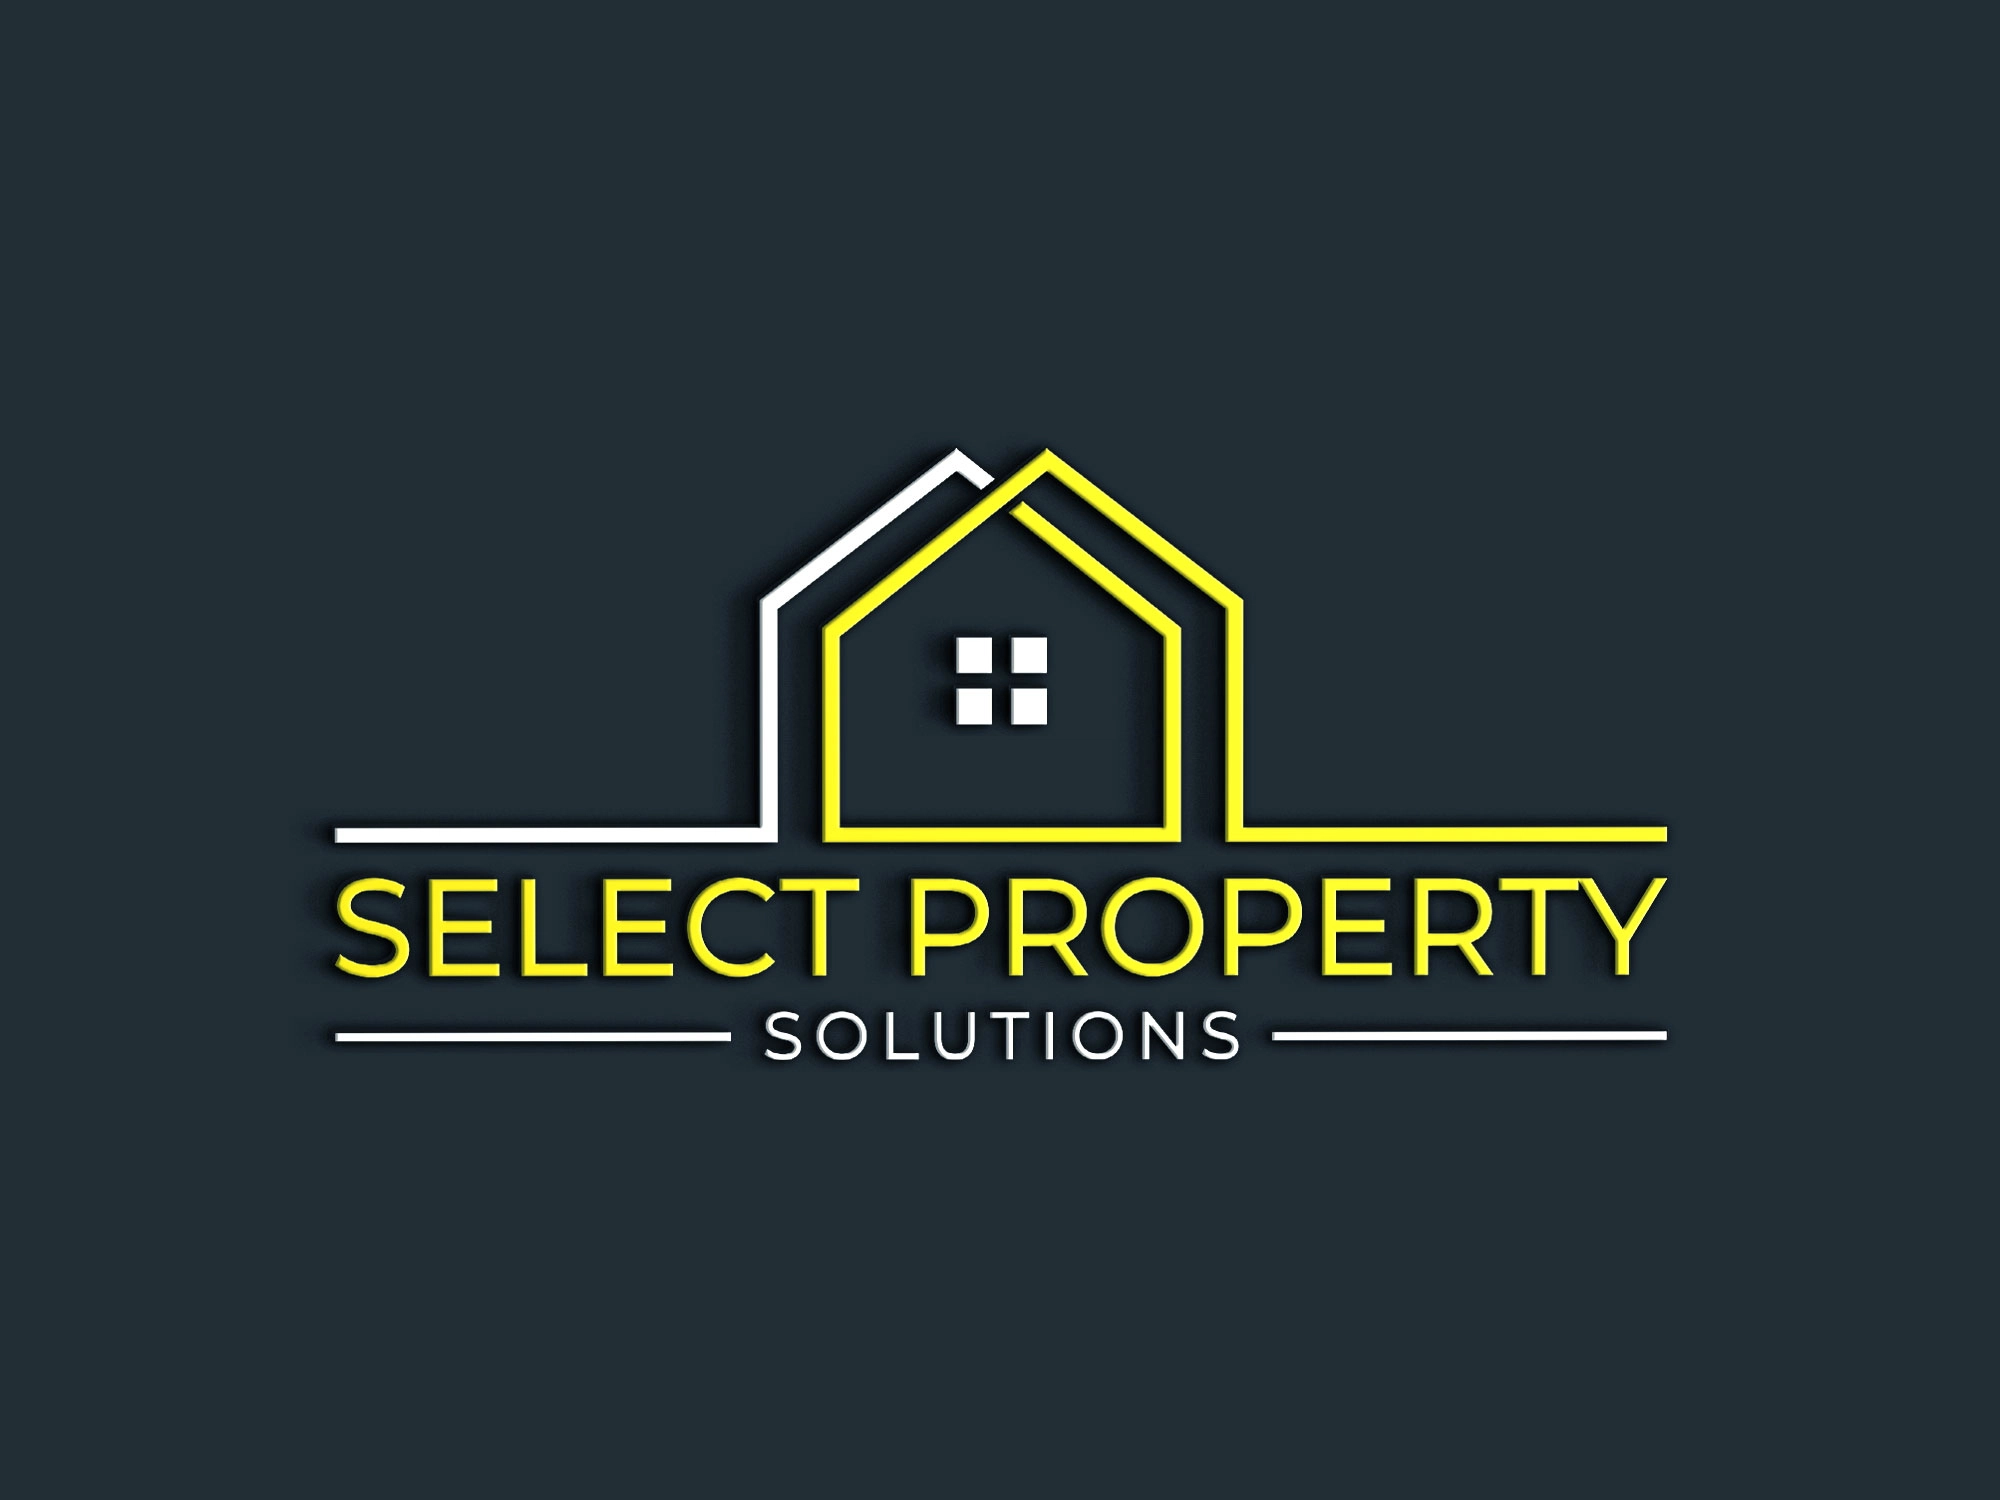 Select Property Solutions Logo